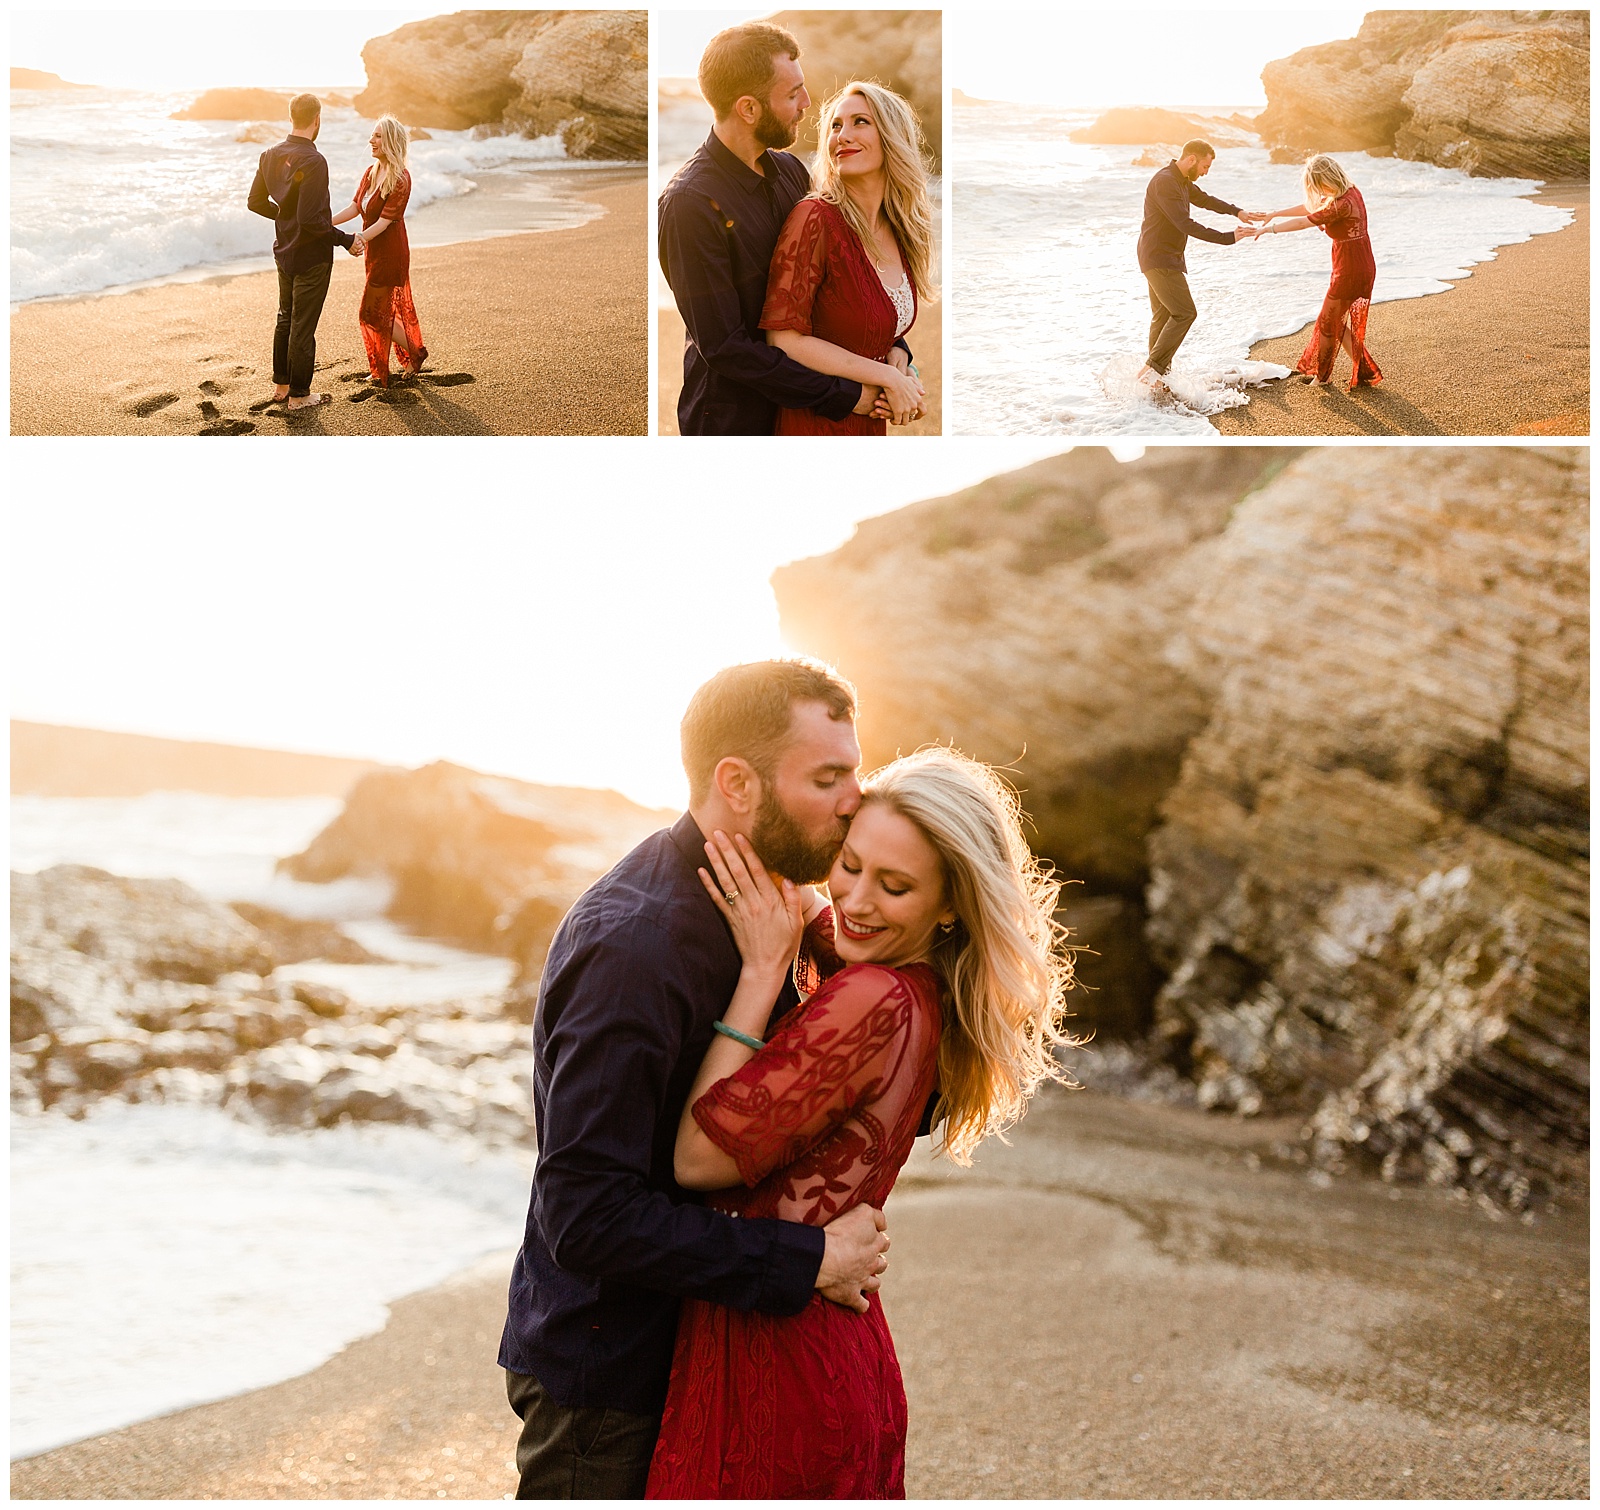 maroon and navy blue outfits for beach engagement photos